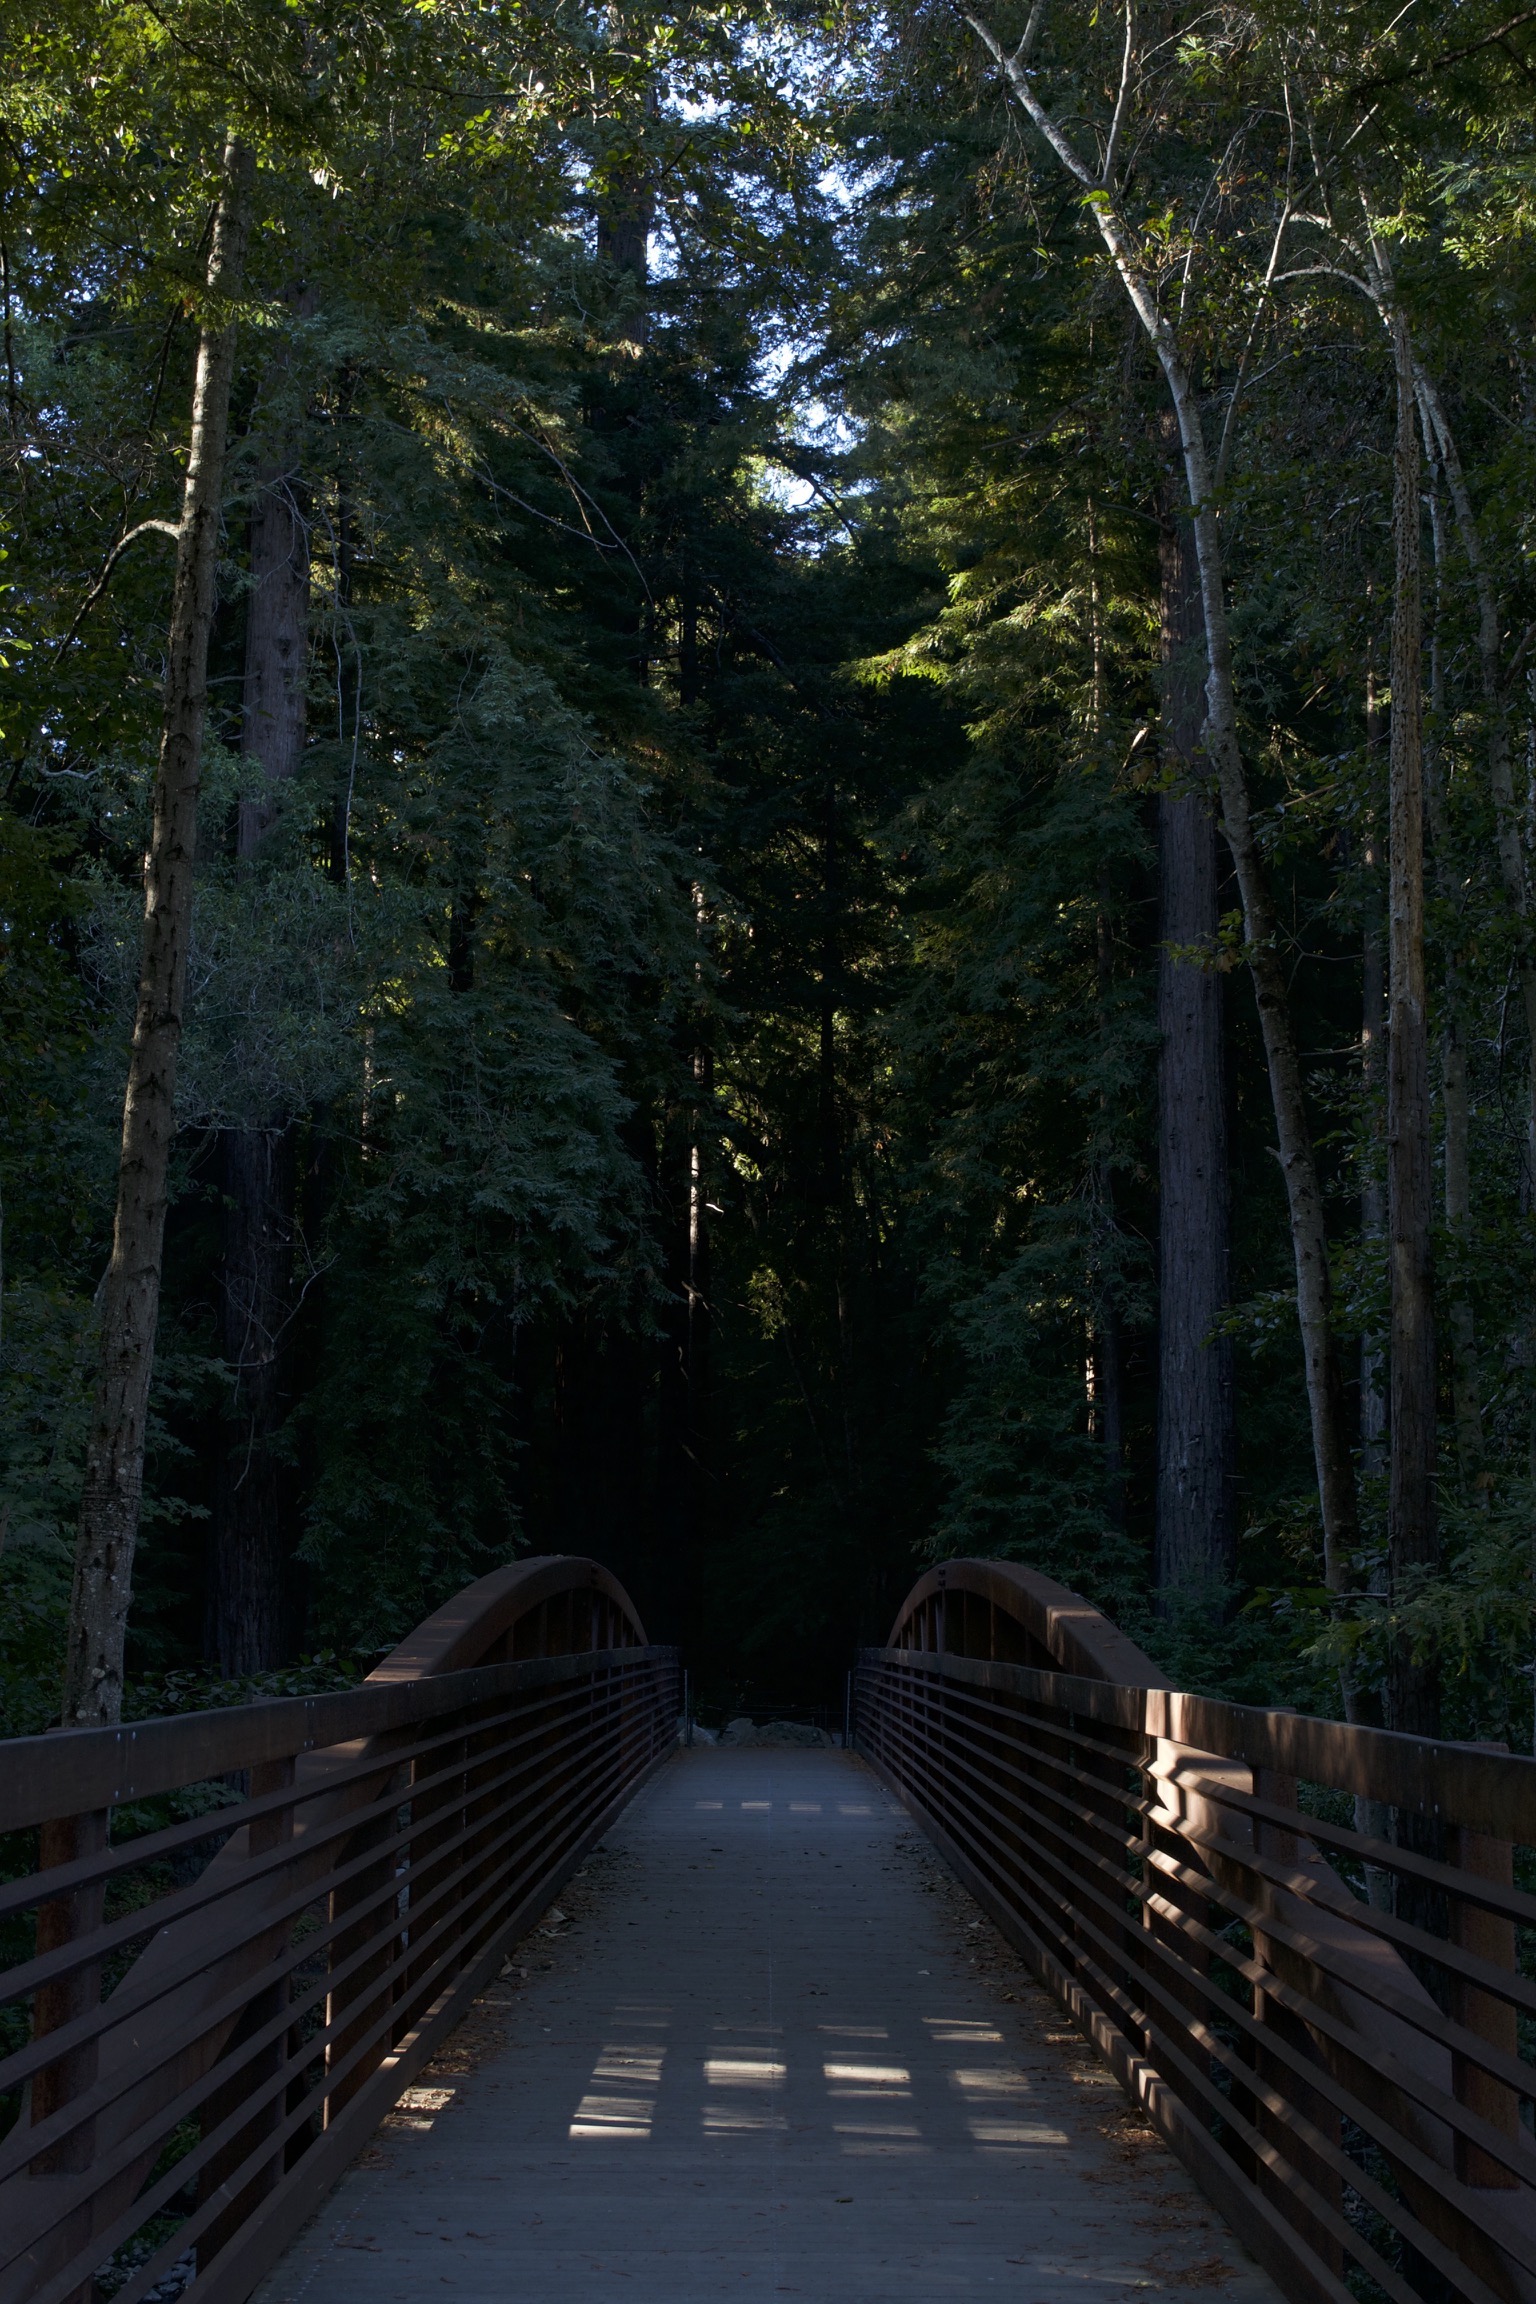 A footbridge leads into a dark forest.